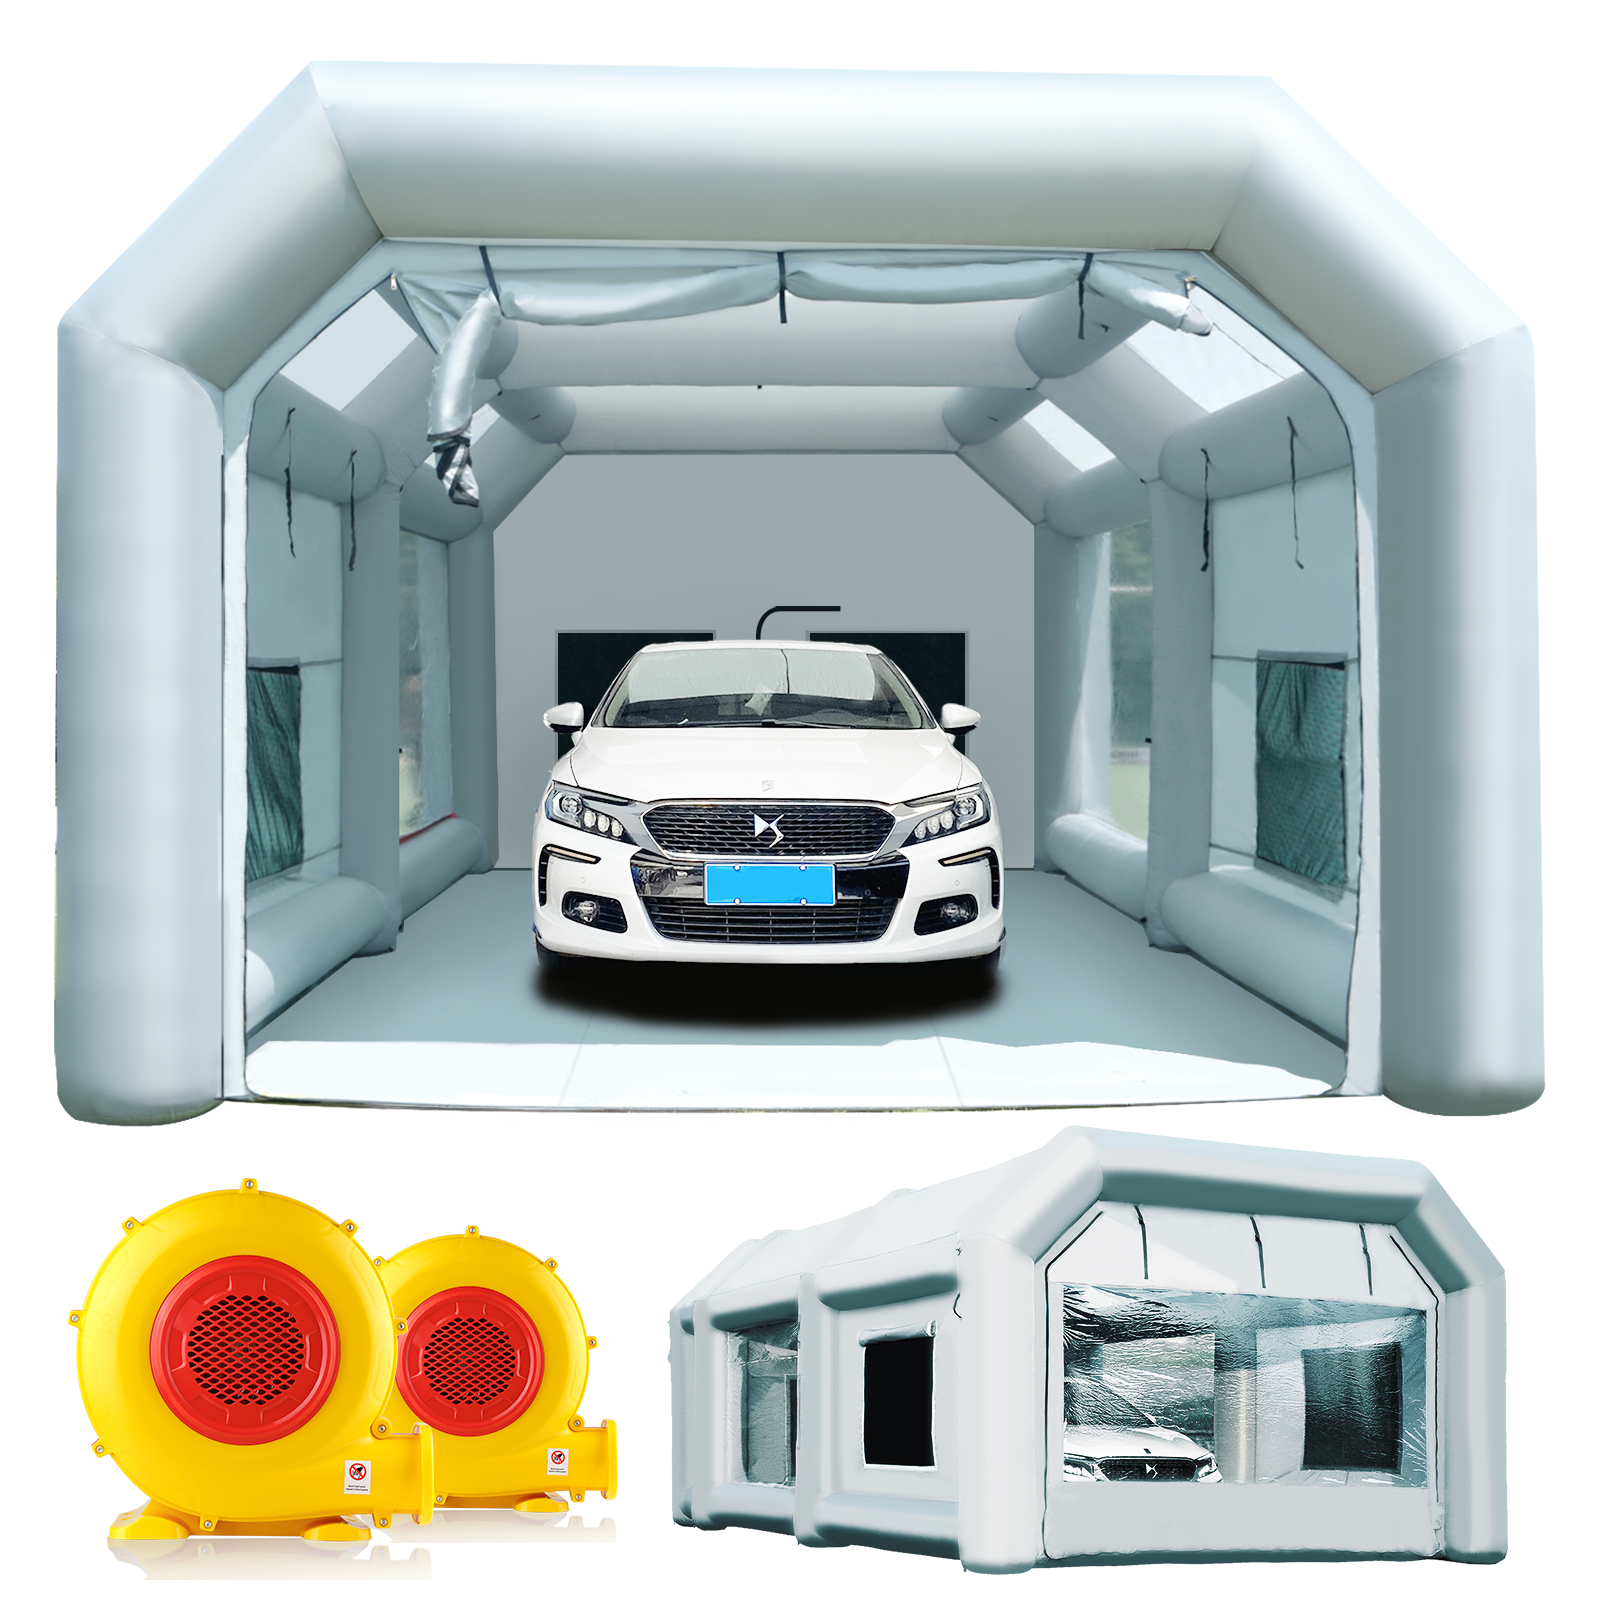 GORILLASPRO Inflatable Panit Booth 30x16x11Ft with 2 Powerful Blowers (750W+1100W), Perfect for Vehicle Painting, More Durable Inflatable Paint Tent